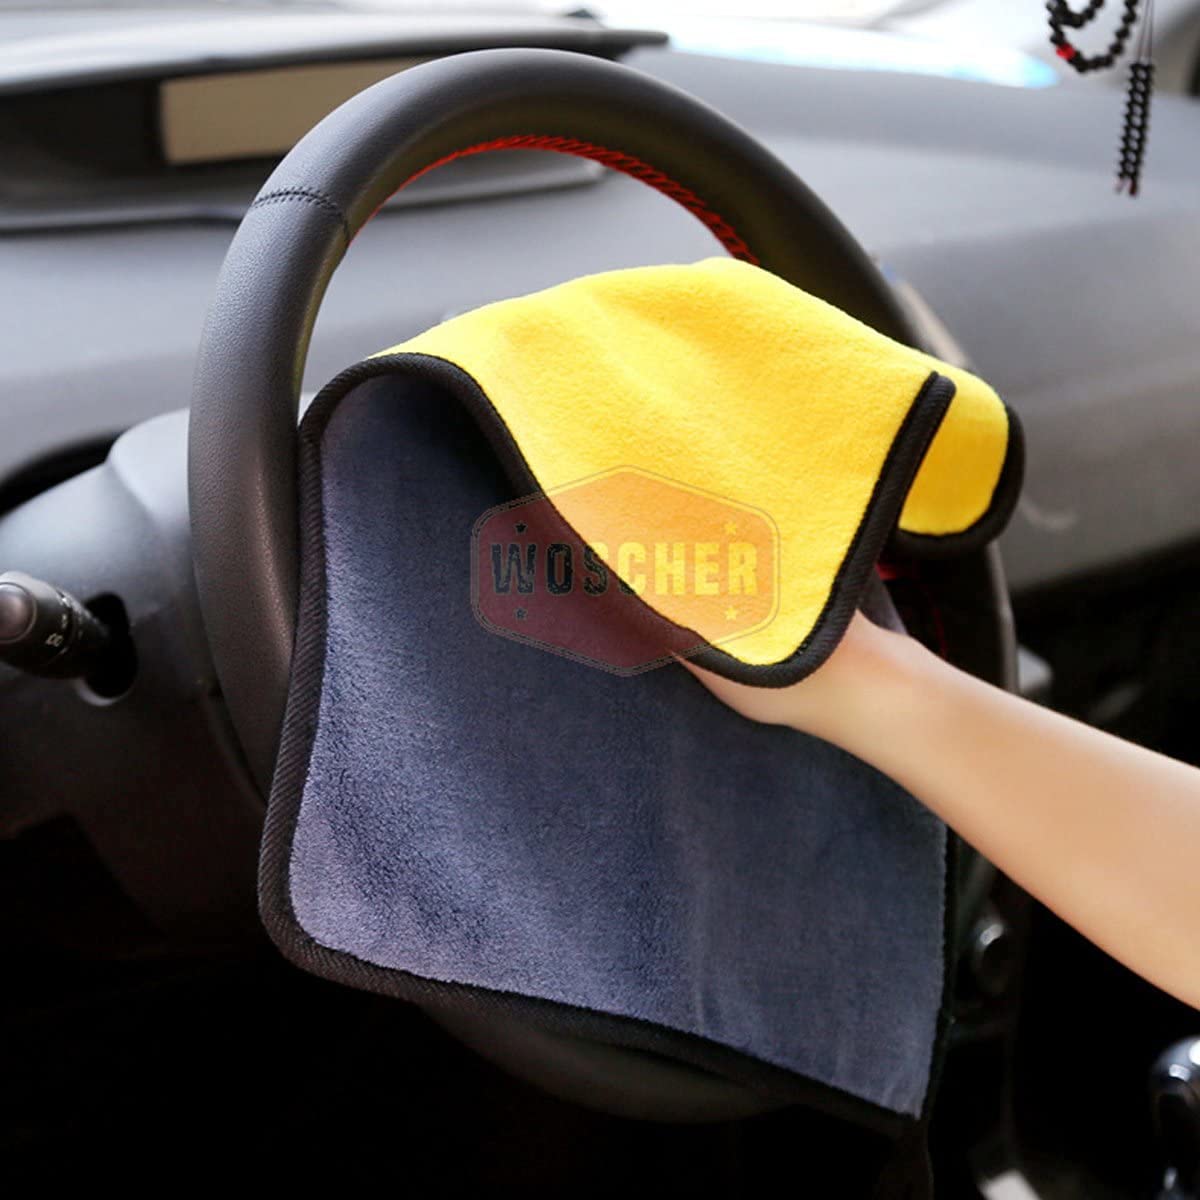 Woscher Double Side Microfiber Cloth for Car (Pack of 1)